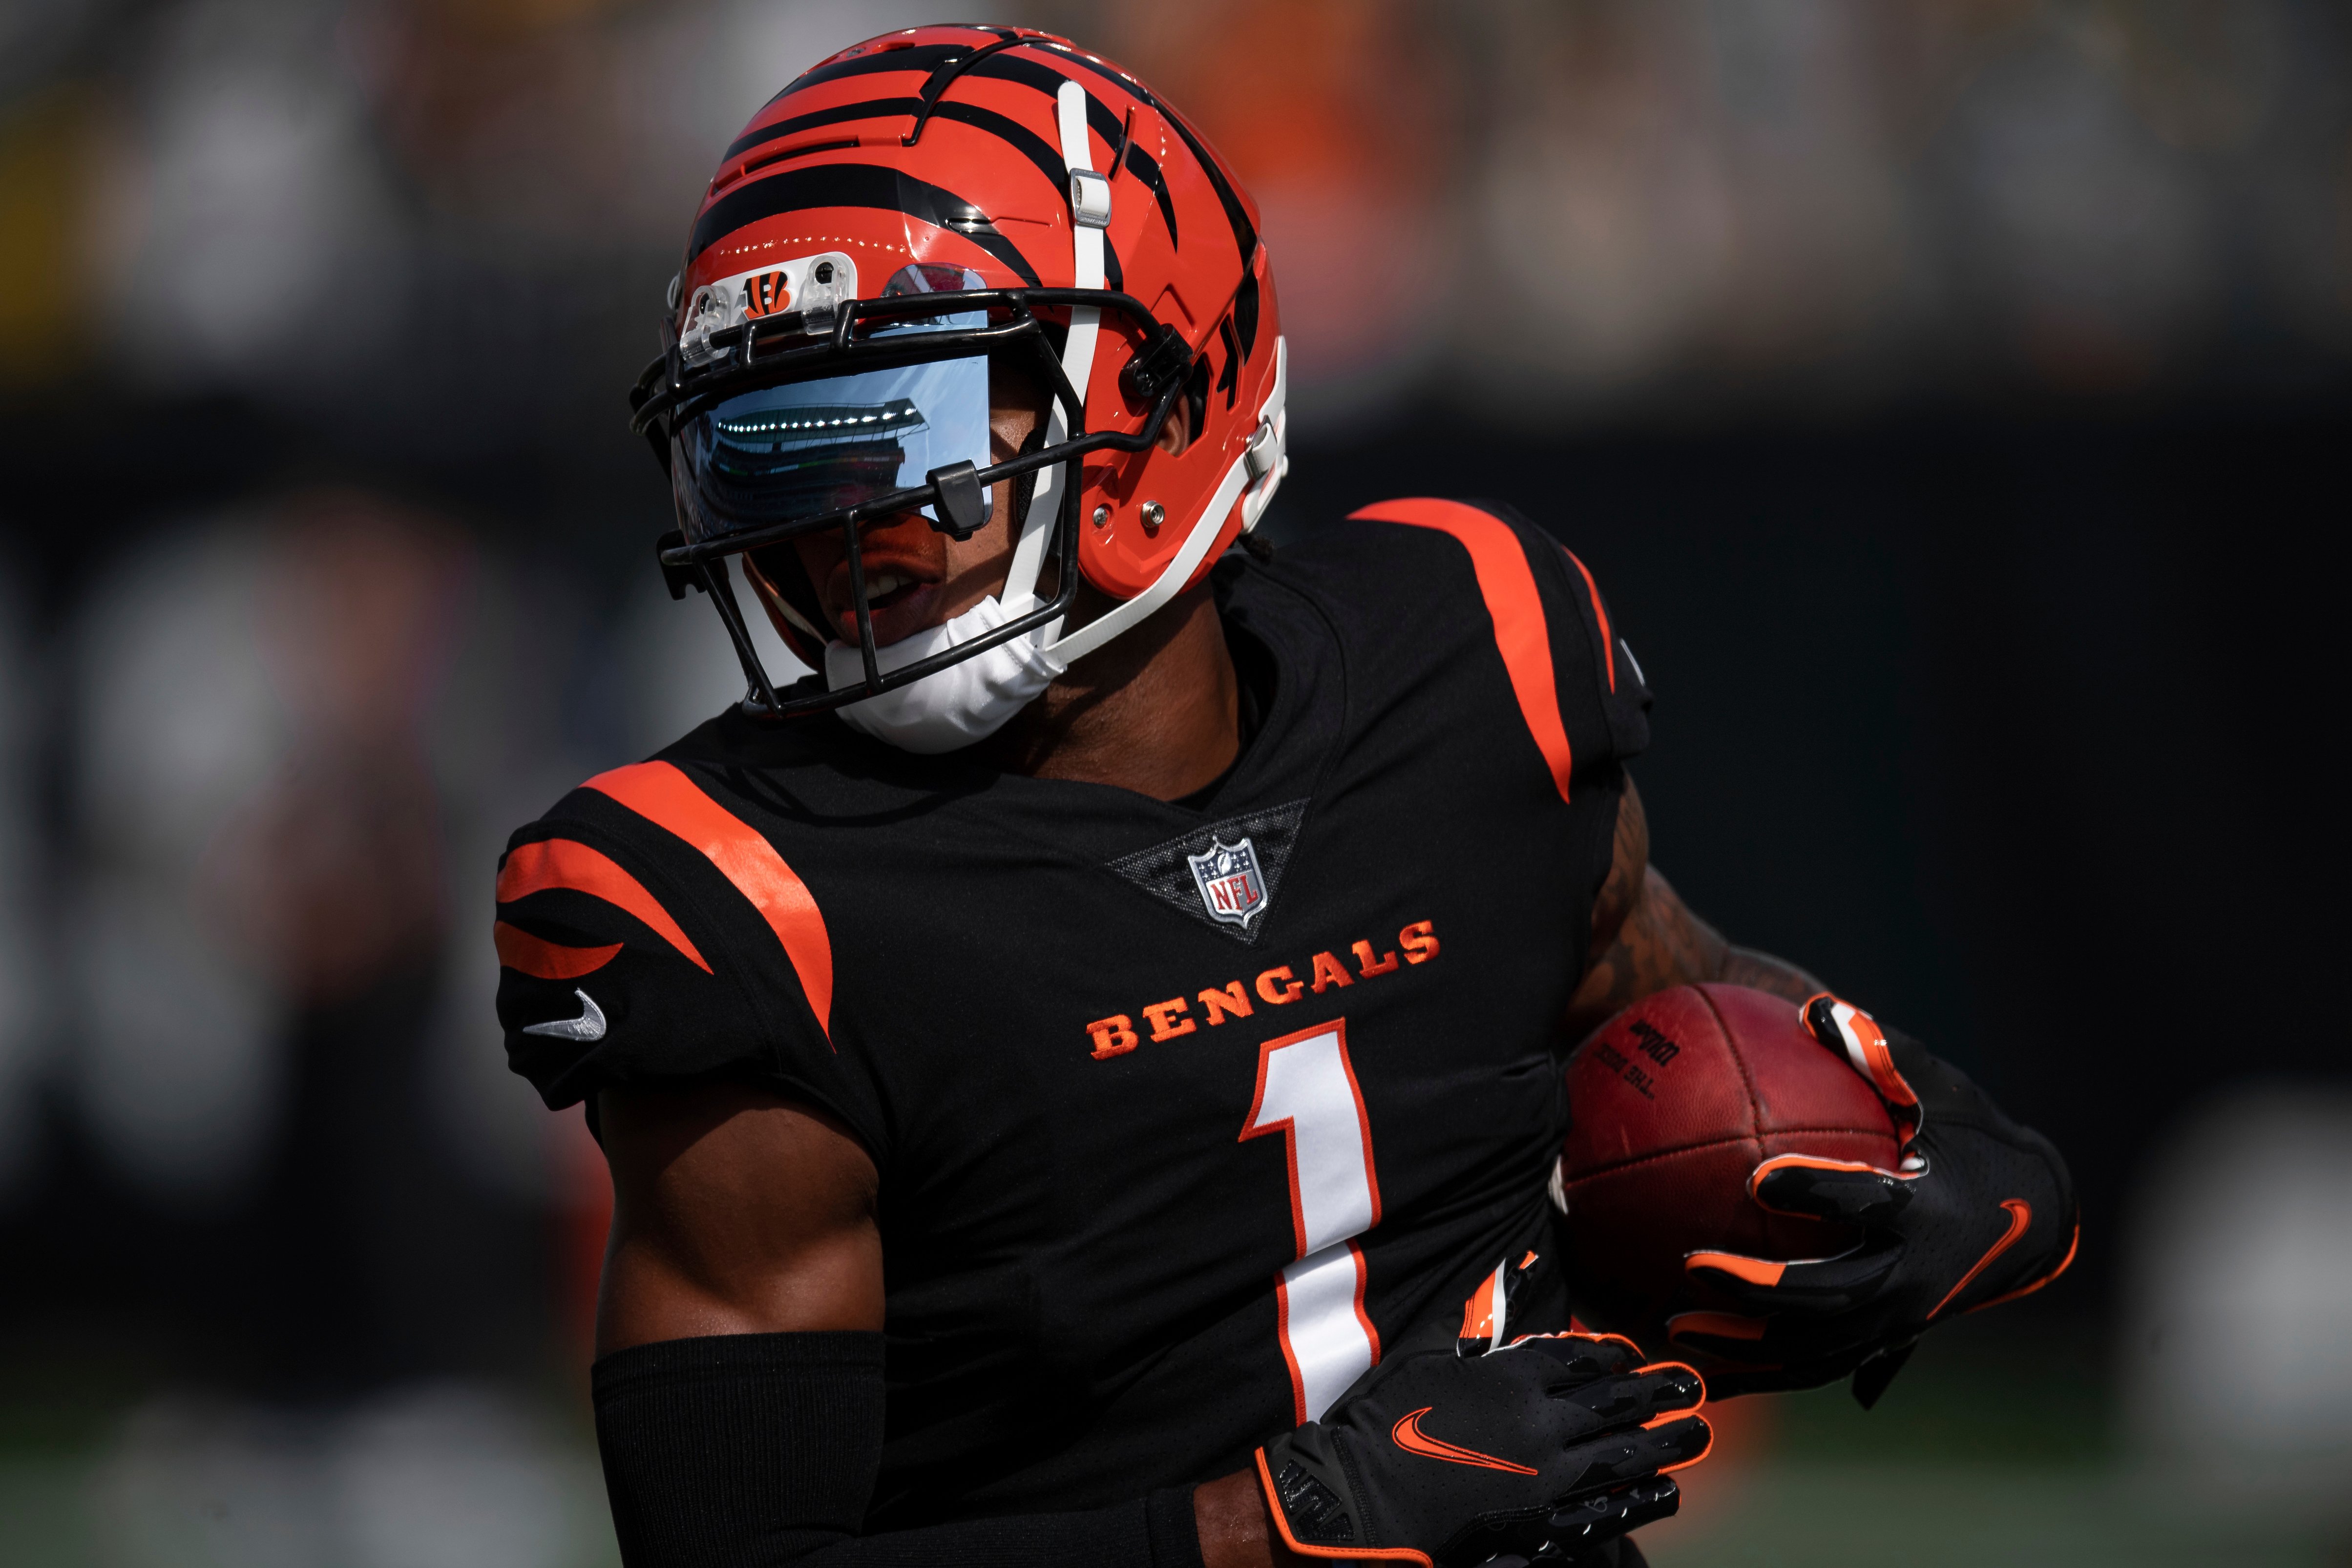 Bengals emerging star WR Chase wins Rookie of the Week for Week 5